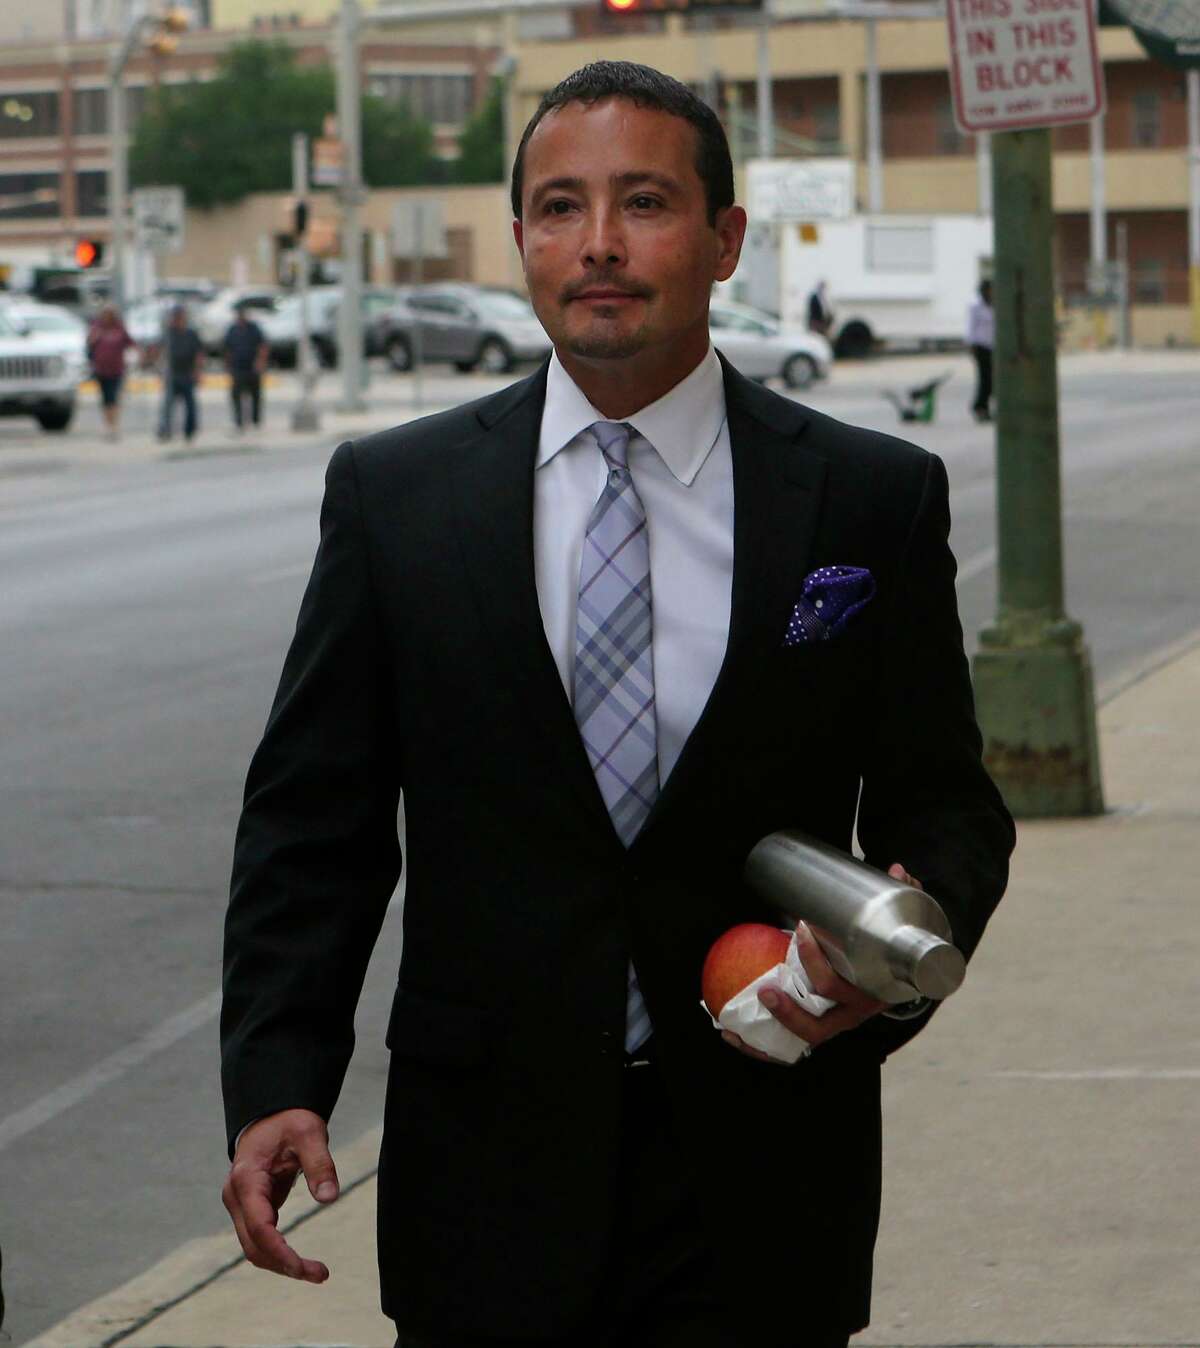 San Antonio oil and gas businessman Brian Alfaro lost his bid to overturn an a $8 million court judgment against him and his companies. Alfaro his pictured in April 2017 heading to U.S. Bankruptcy Court for a trial on a lawsuit brought by investors who alleged Alfaro defrauded them.